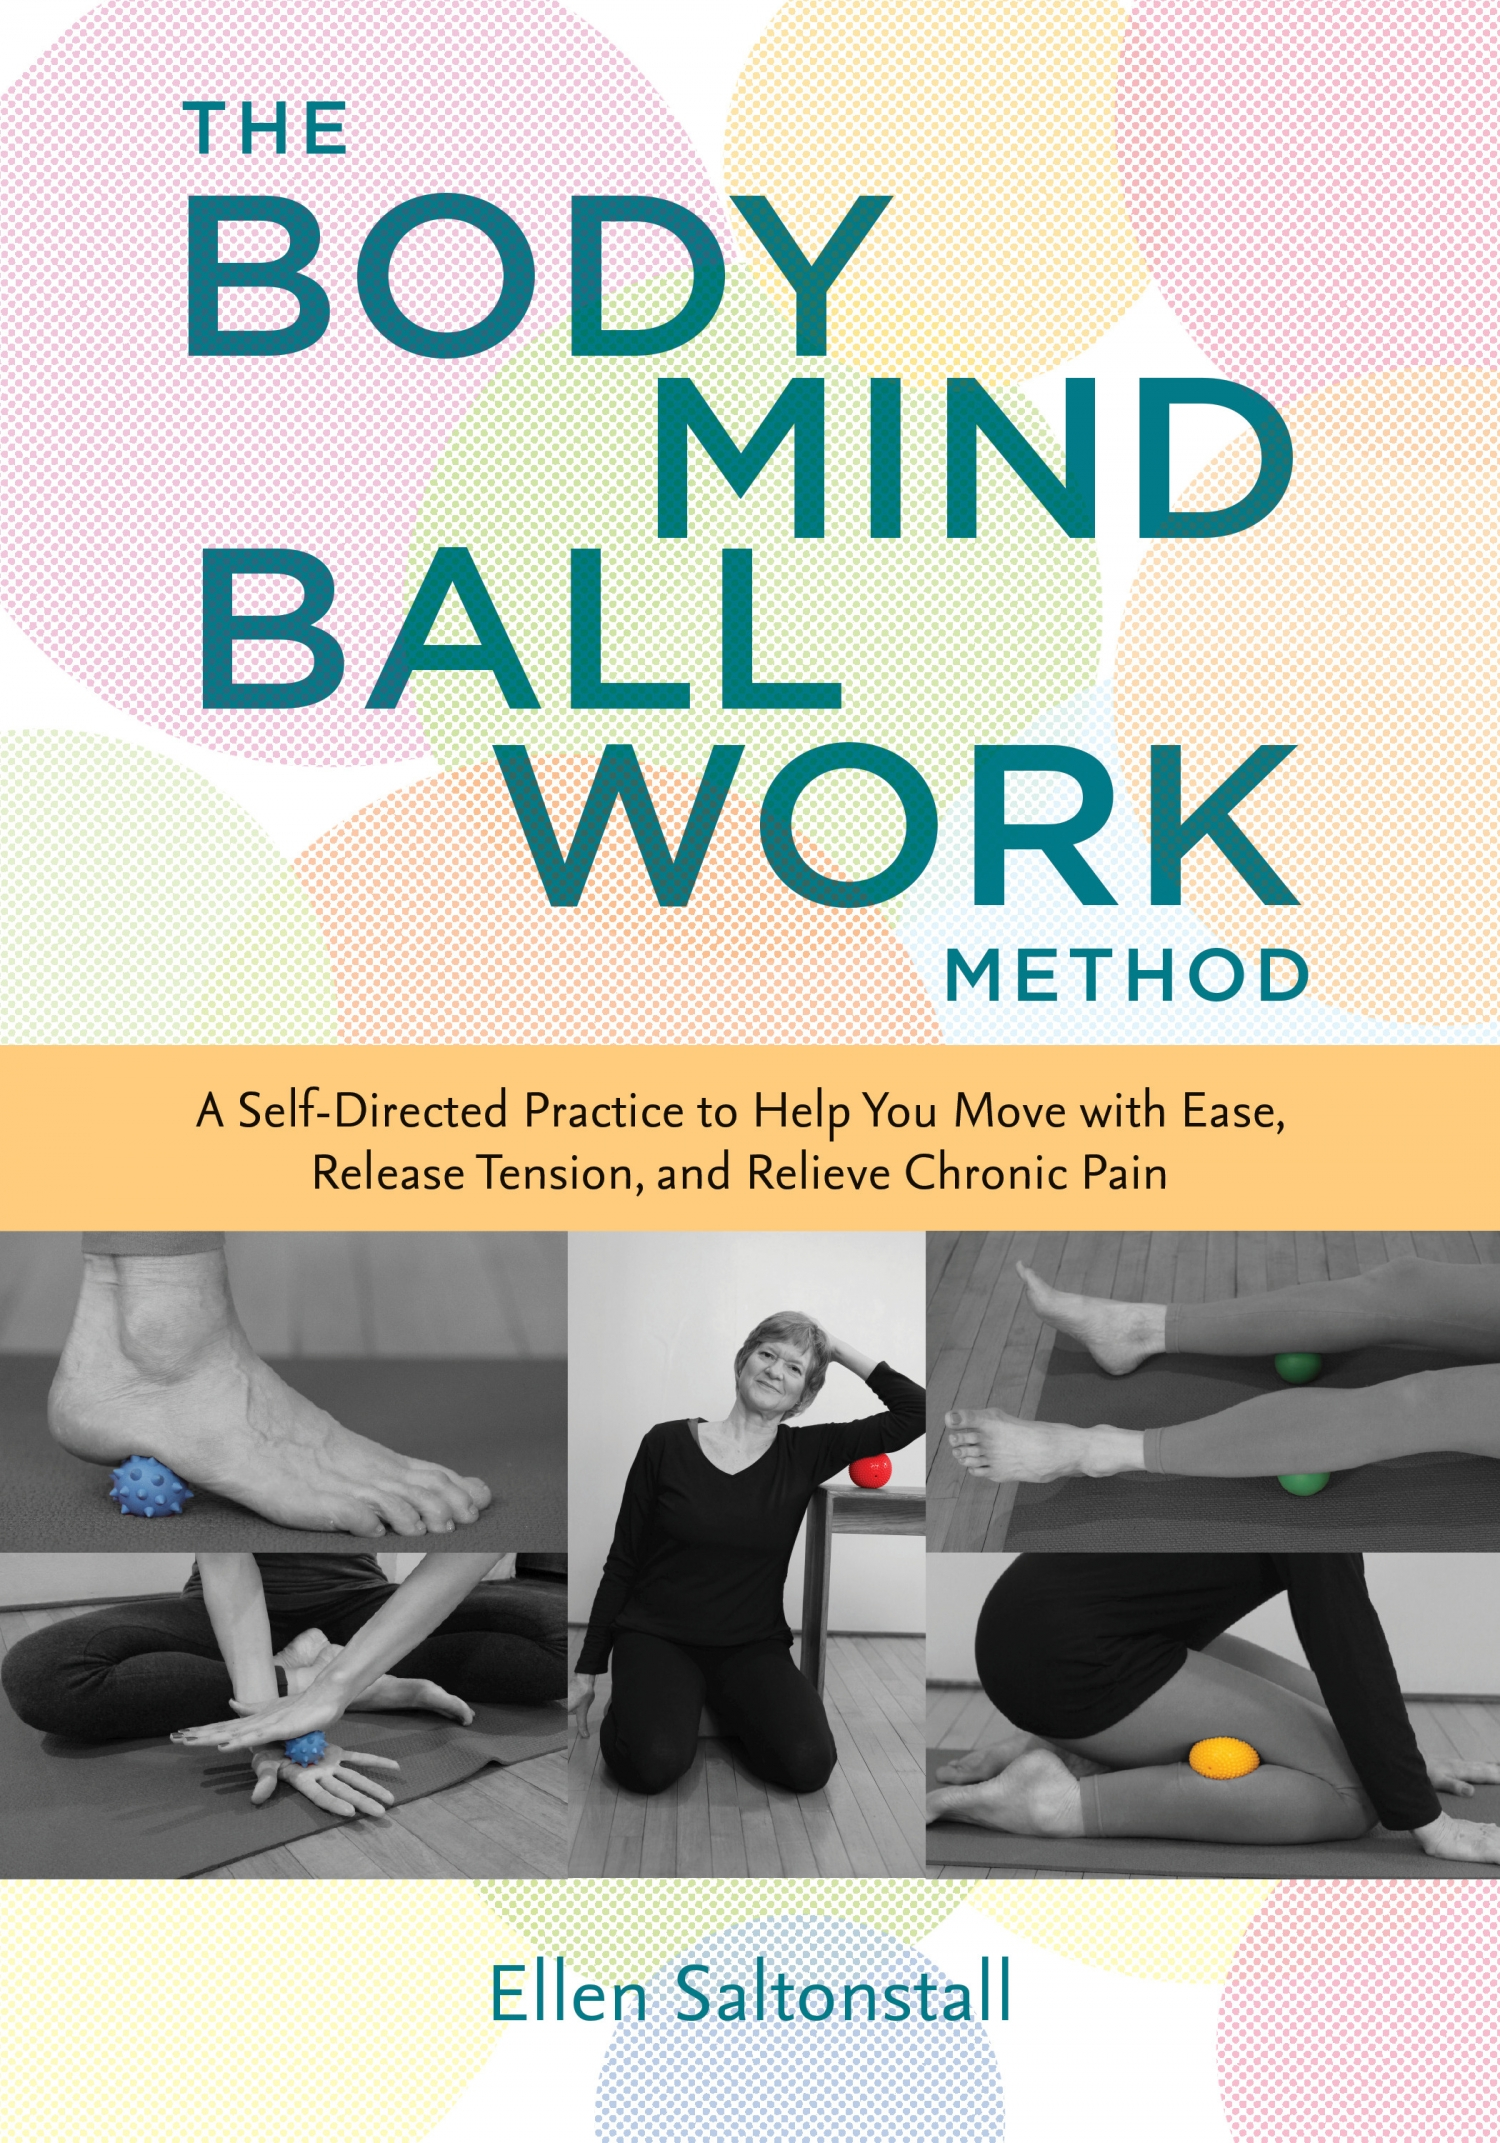 Body Mind Ball. Therapist Alina helps you release tension. Go methods